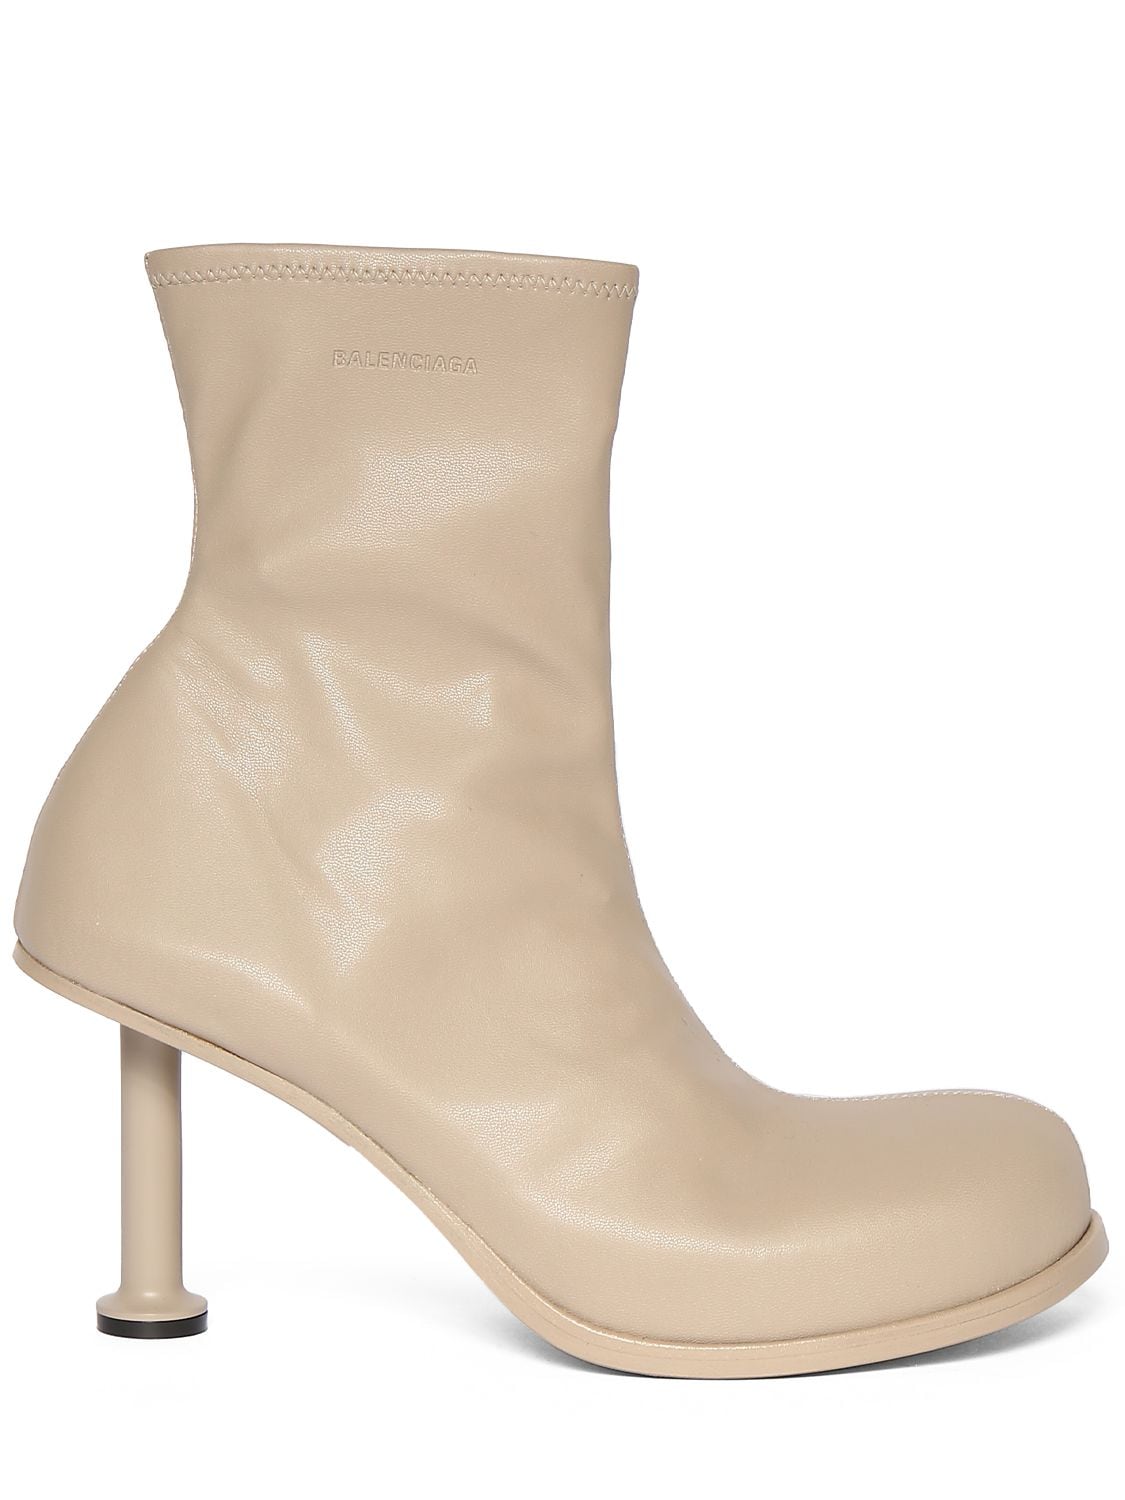 Balenciaga 80mm Mallorca Faux Leather Ankle Boots In Taupe